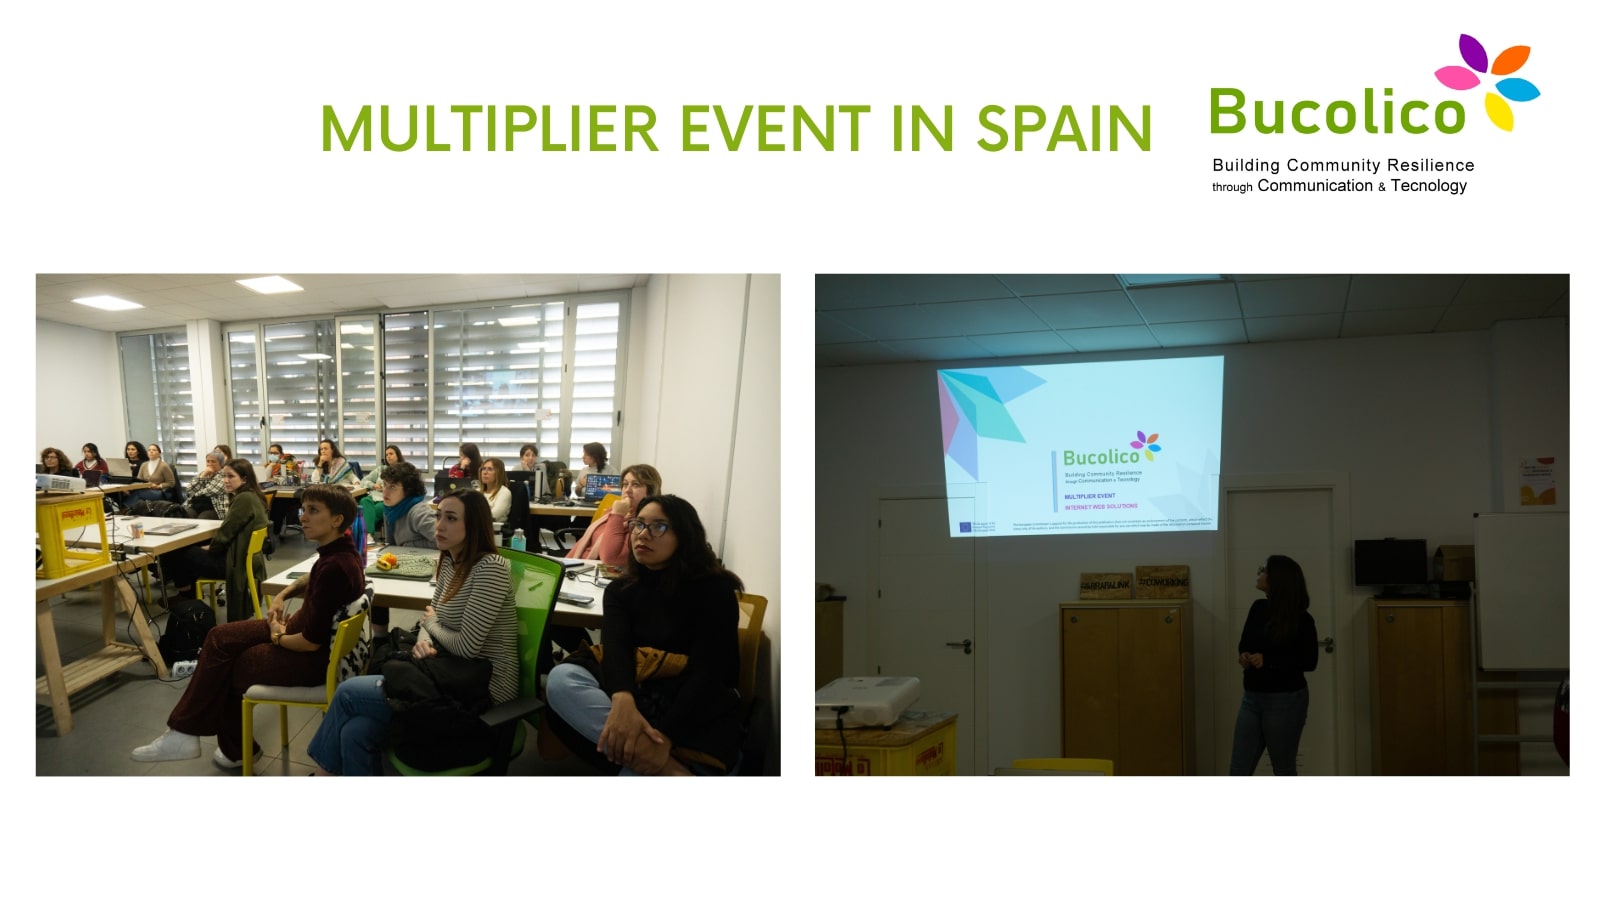 Internet Web Solutions hosts the successful BUCOLICO MULTIPLIER EVENT